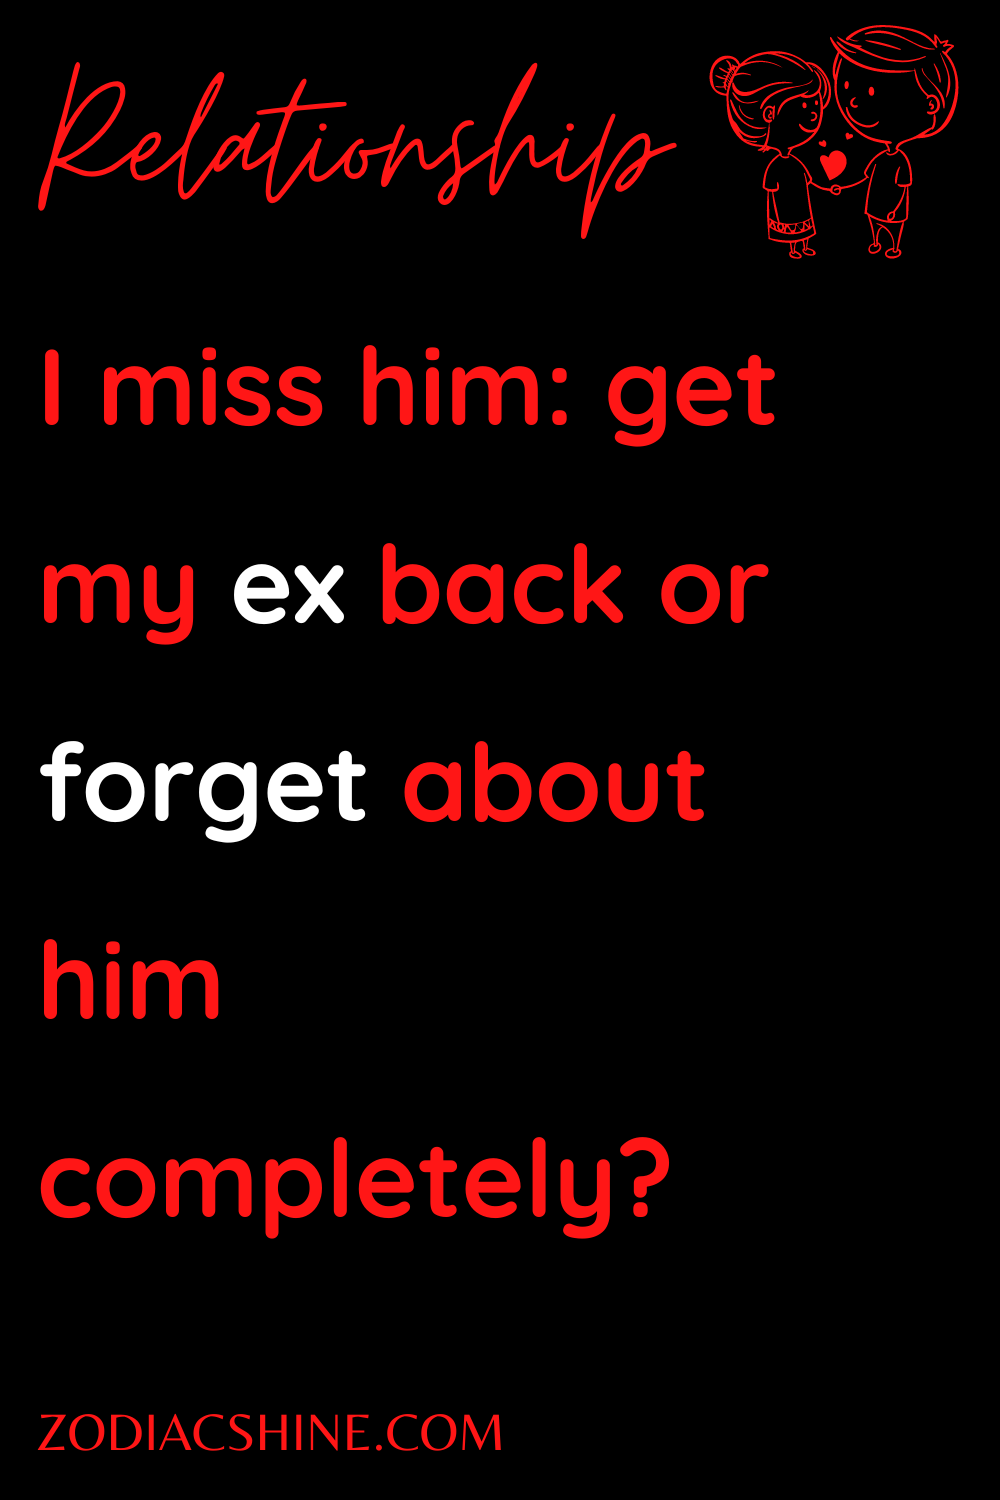 I miss him: get my ex back or forget about him completely?